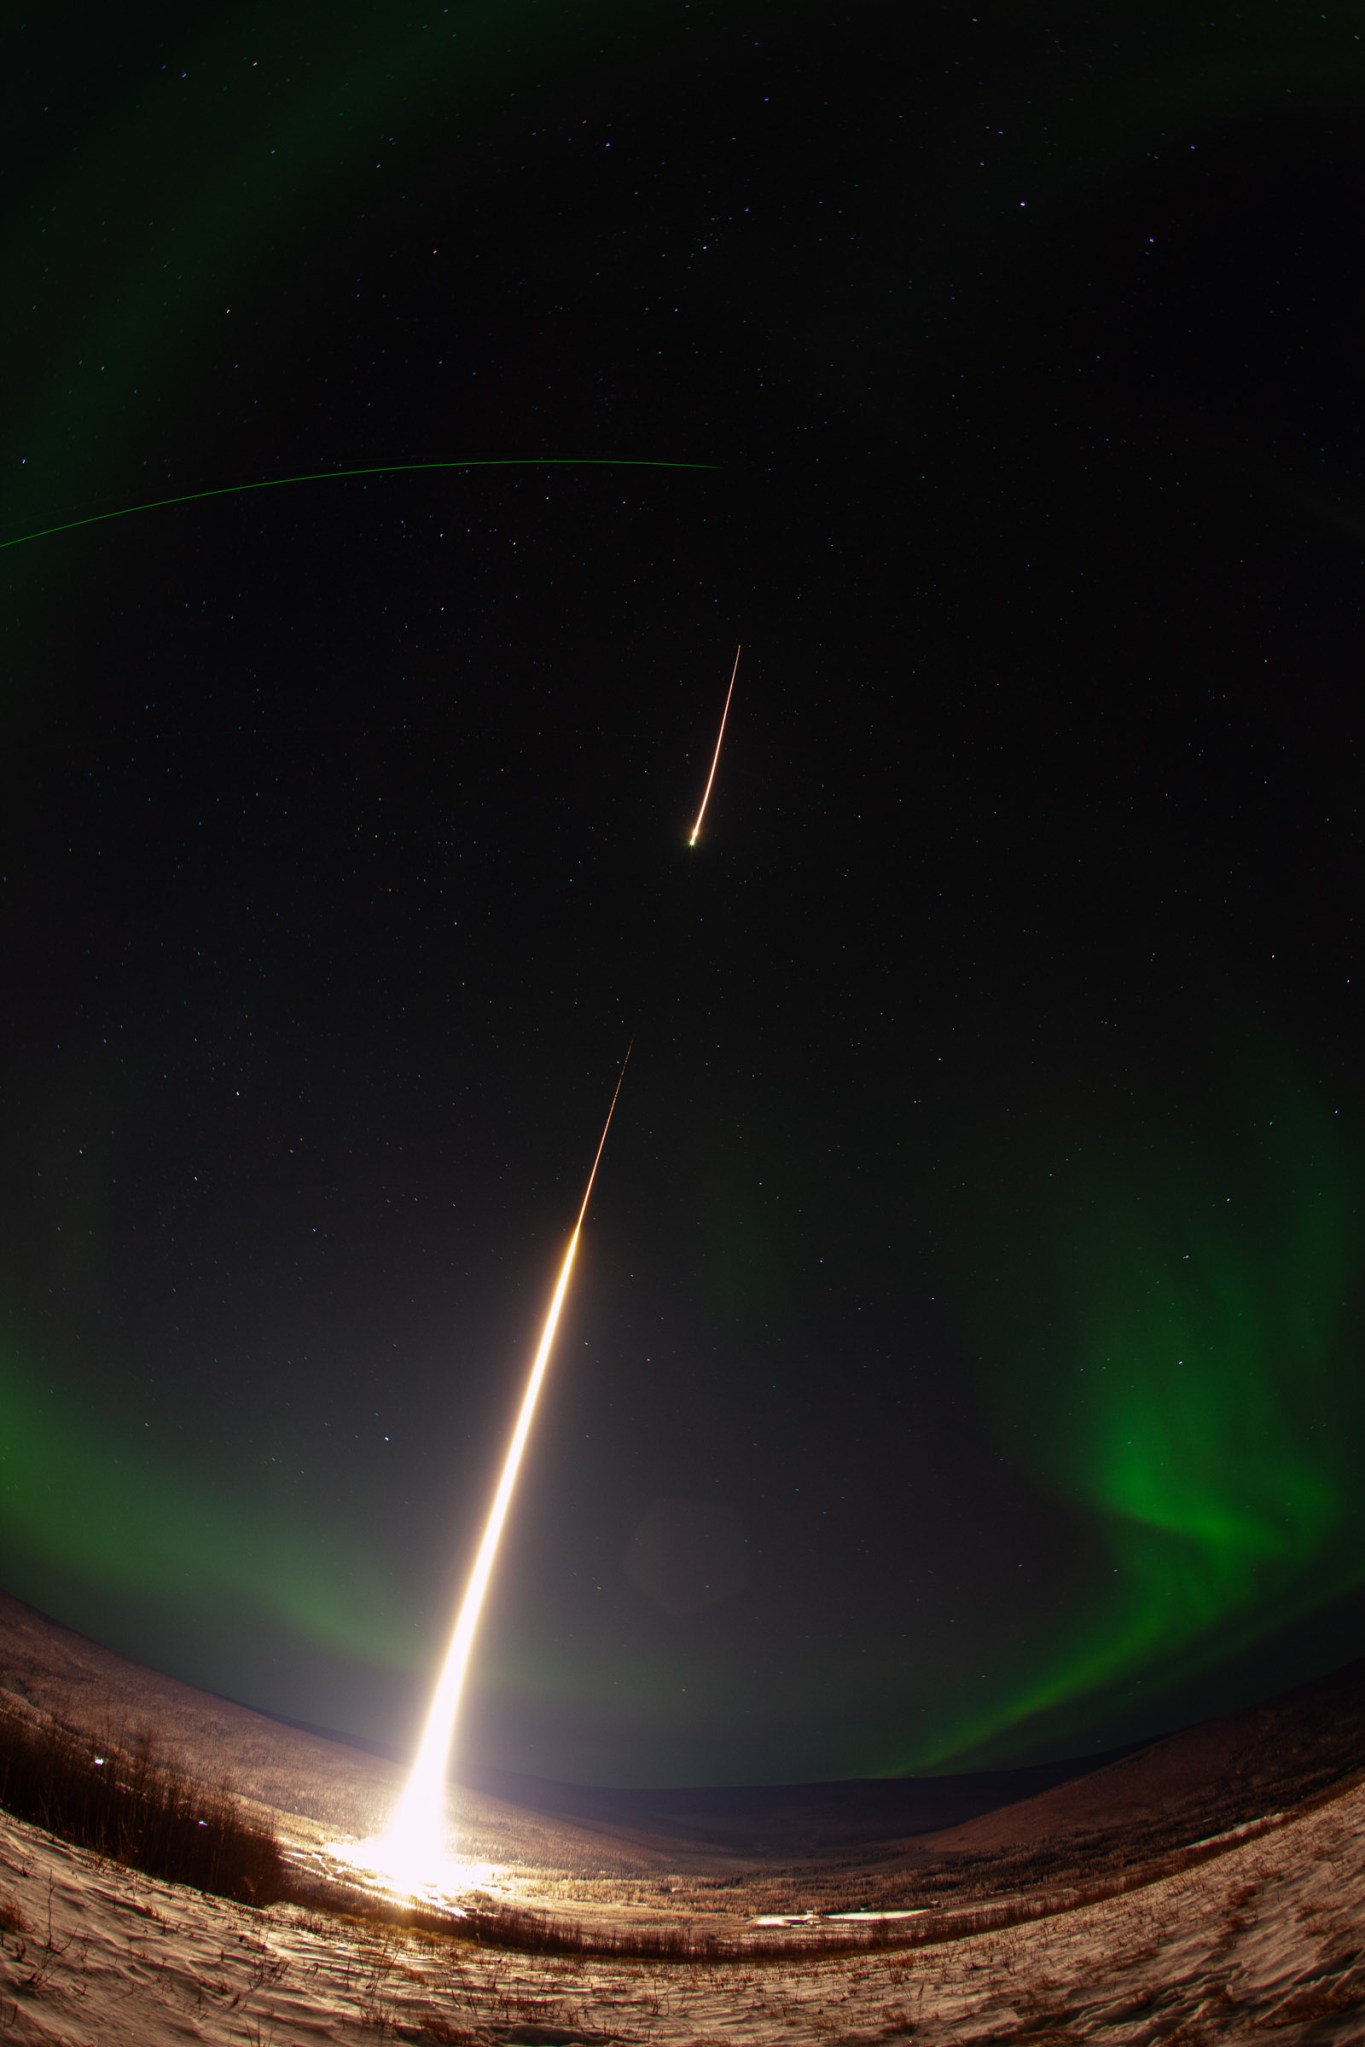 A long-exposure photograph of a sounding rocket launching in a night sky highlighted by aurora. The sounding rocket is a bright white streak, leaving from a snow-covered ground and moving up into the sky. A small break in the streak represents the first stage of the rocket burning out and the second stage igniting. A soft, green aurora frames the edges of the image, with several white stars speckled through the black sky. A bright green line toward the top of the frame represents a LIDAR beam. A fisheye lens was used for the photograph, creating a curve for the ground and LIDAR beam.